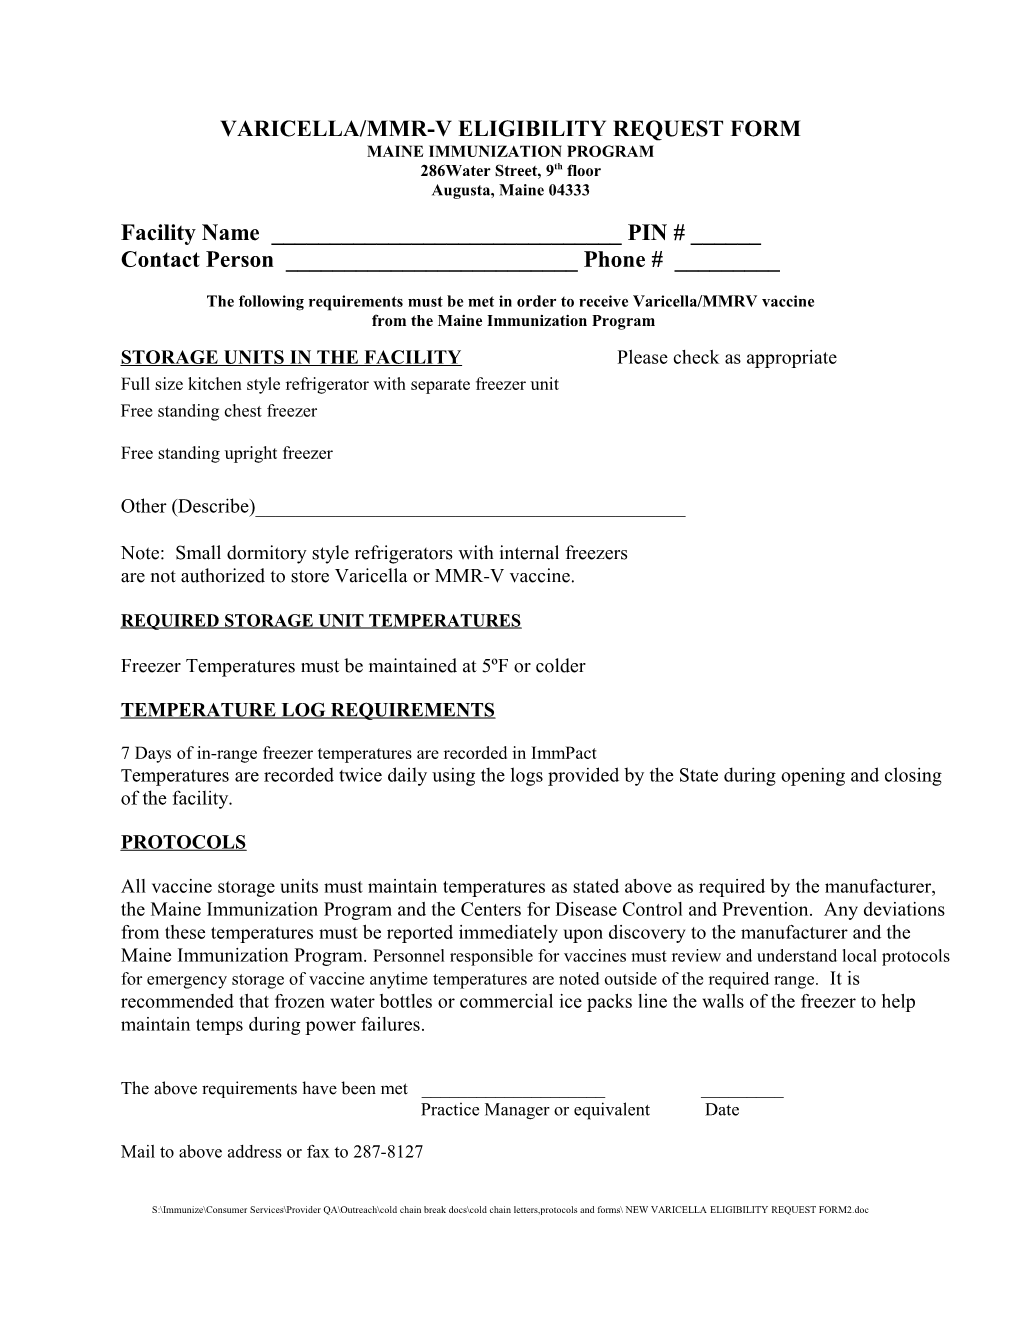 Varicella Eligibility Request Form